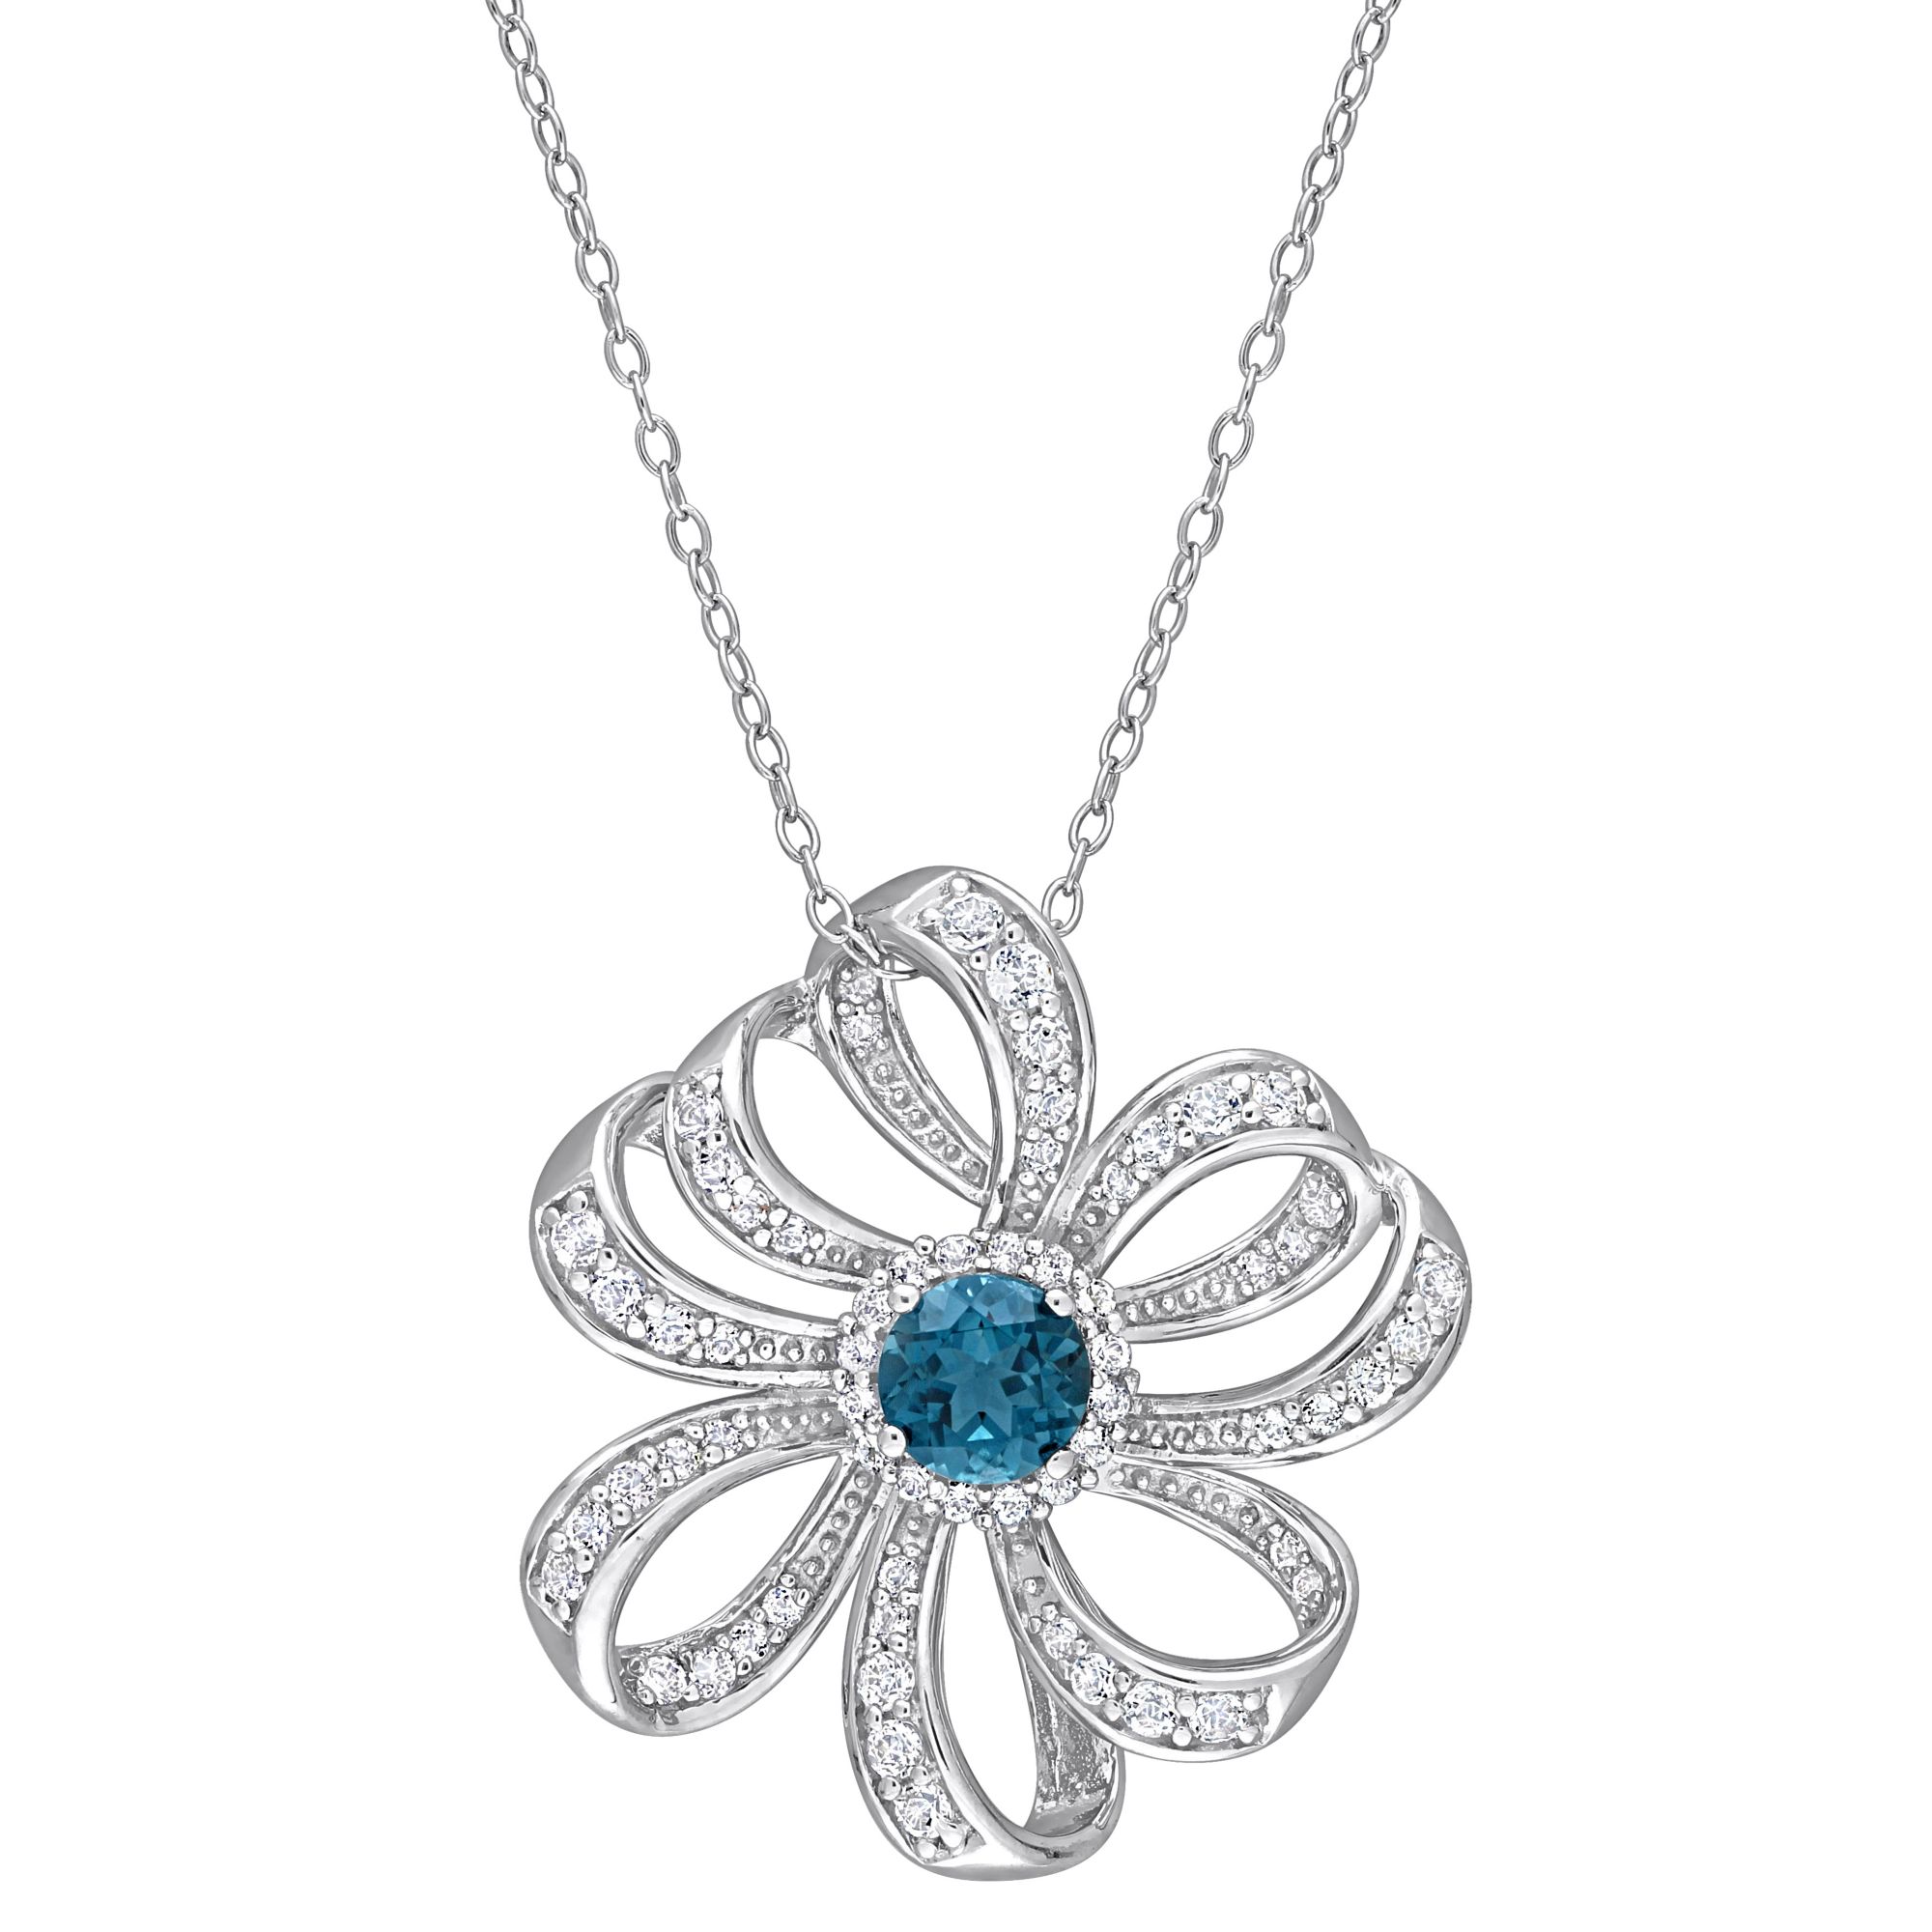 2.25 ct. t.g.w London Blue Topaz and White Topaz Flower Necklace in Sterling Silver